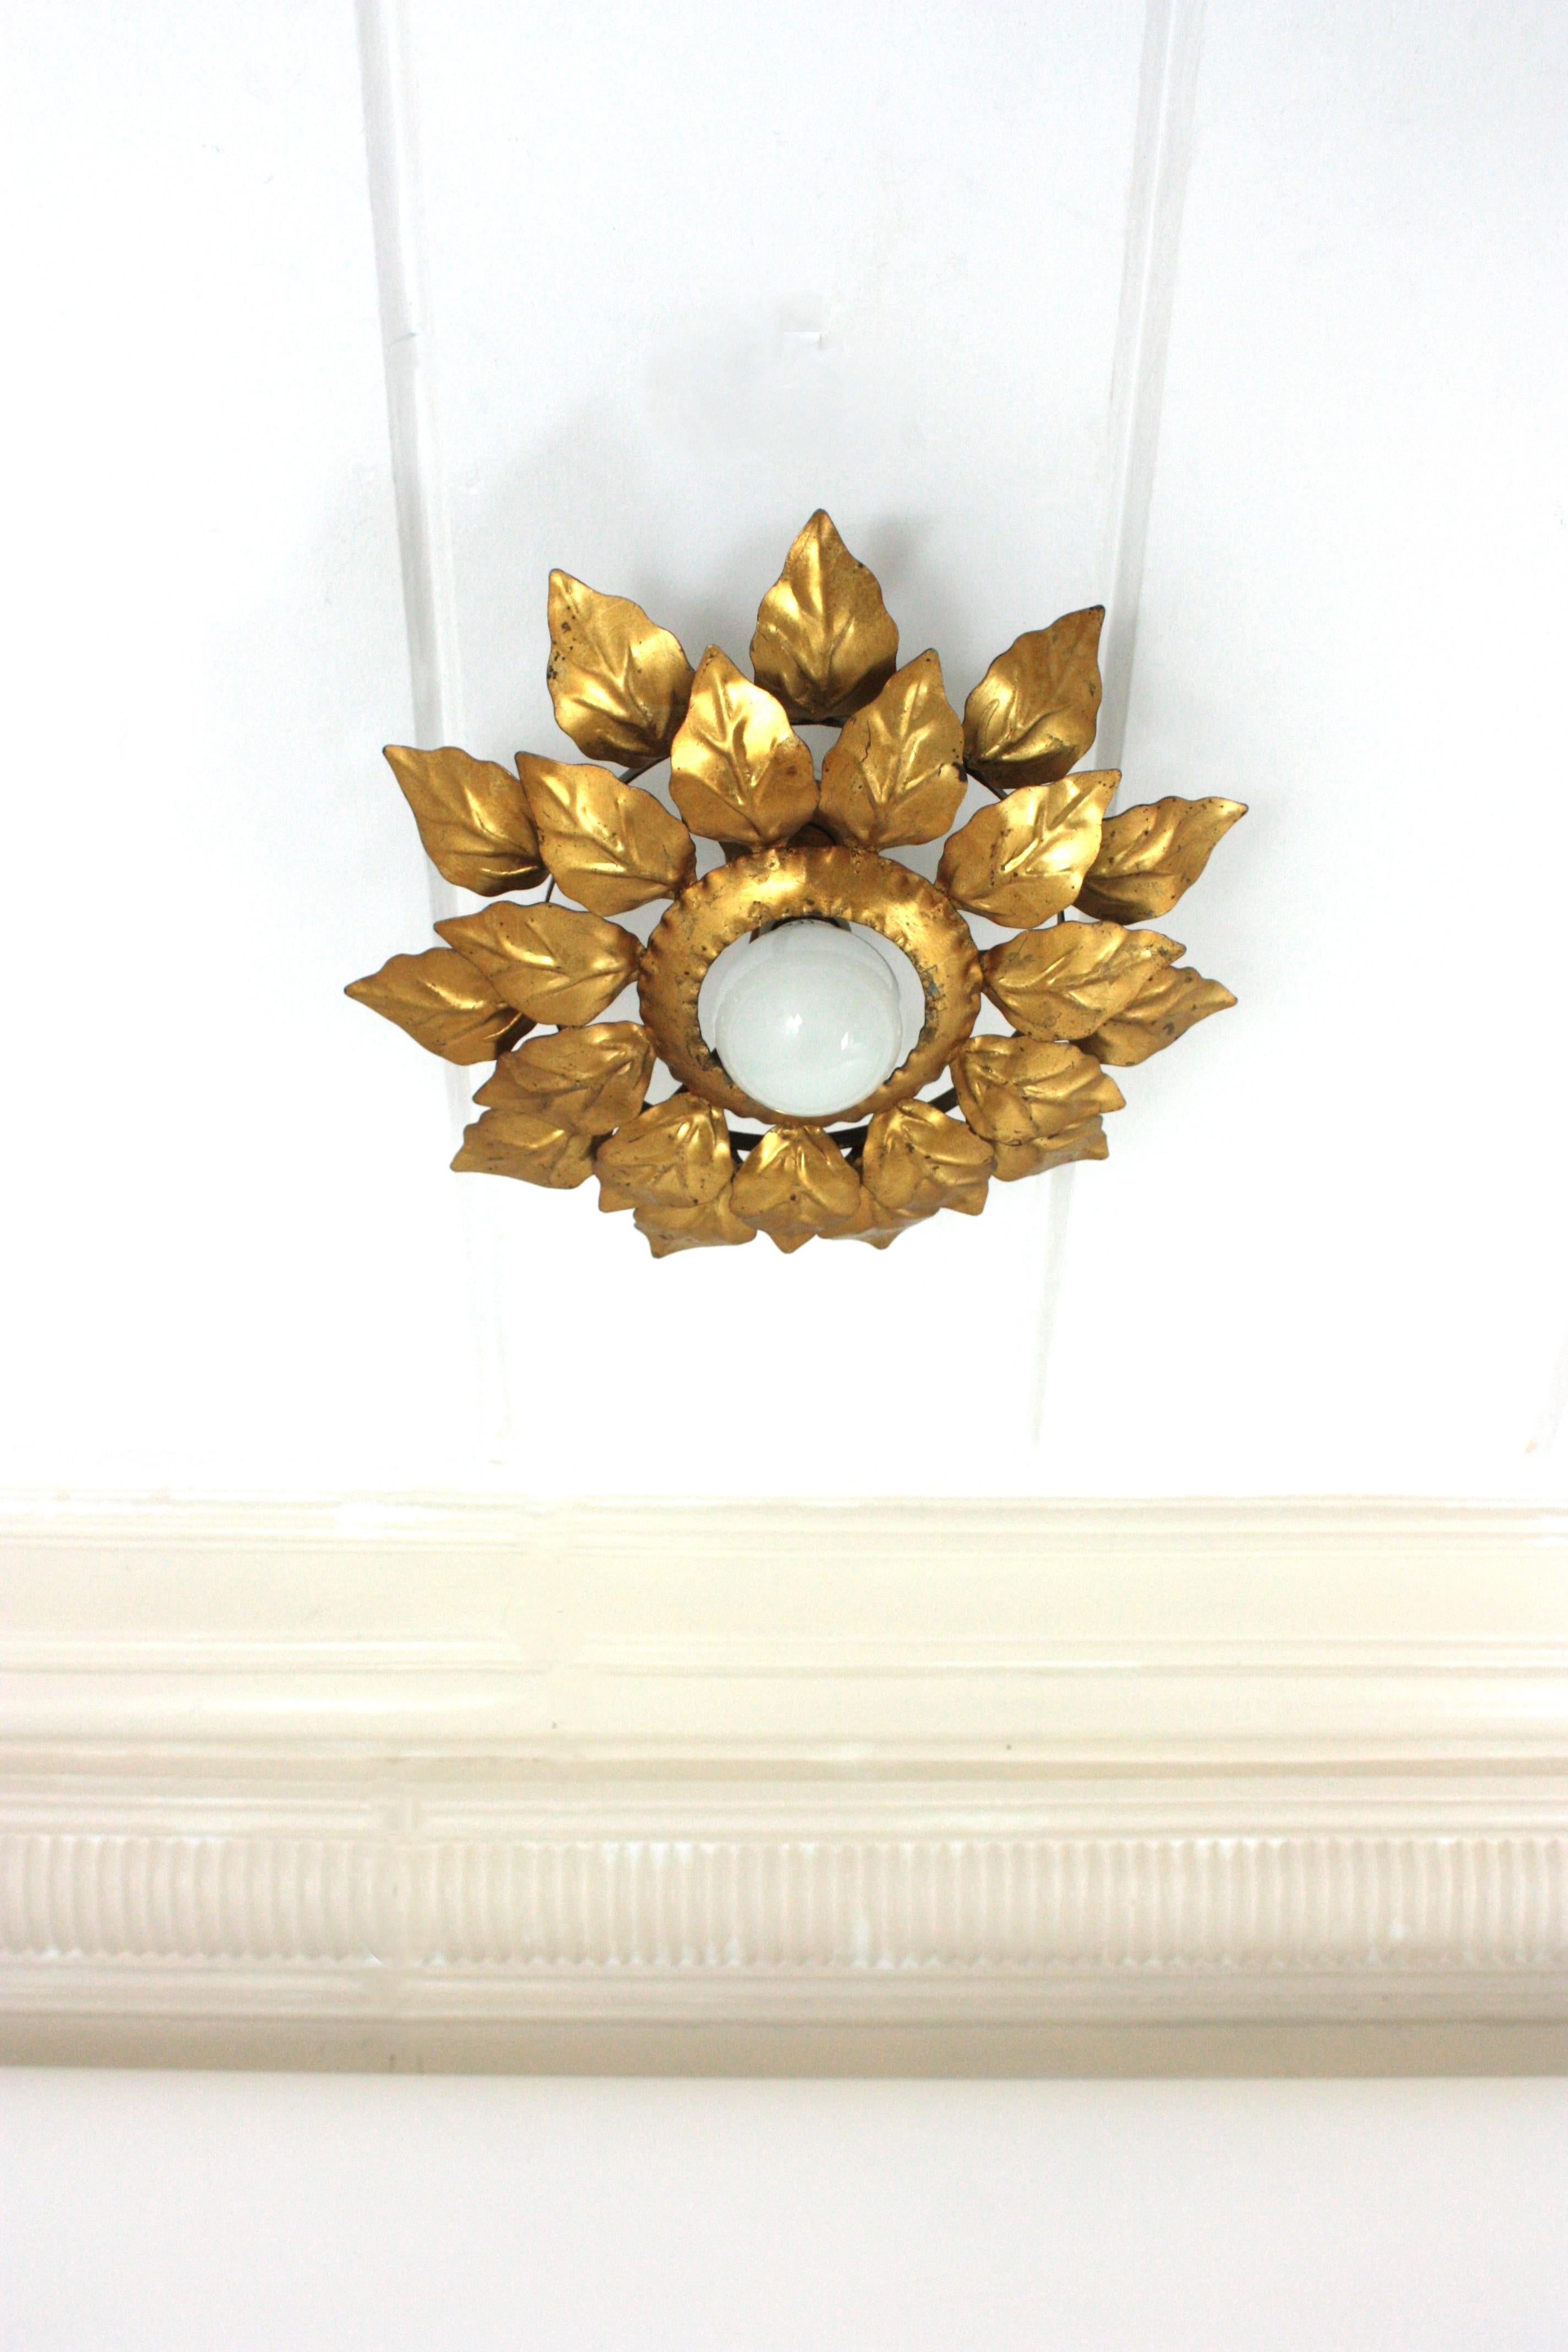 Spanish Sunburst Light Fixture with Double Leafed Frame, Gilt Iron In Good Condition For Sale In Barcelona, ES